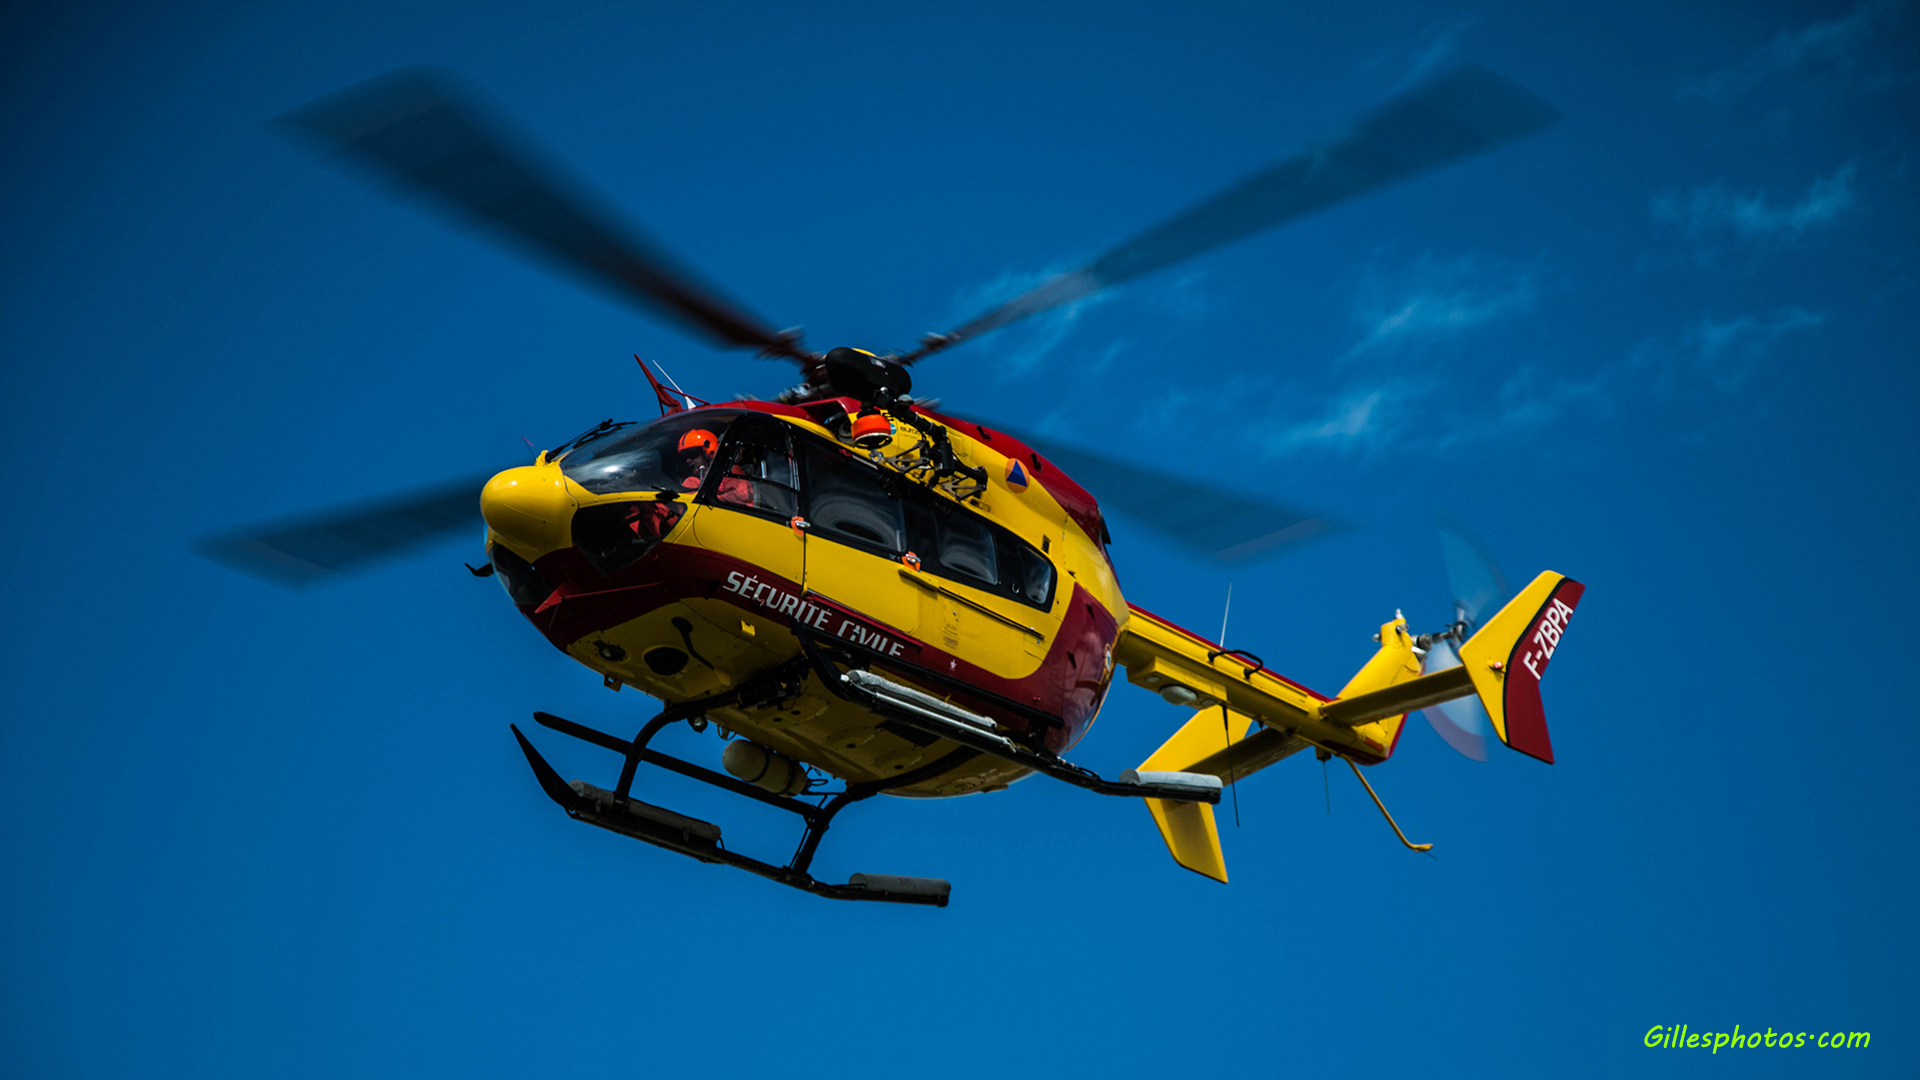 Mai 2018 : helicoptere secours en intervention